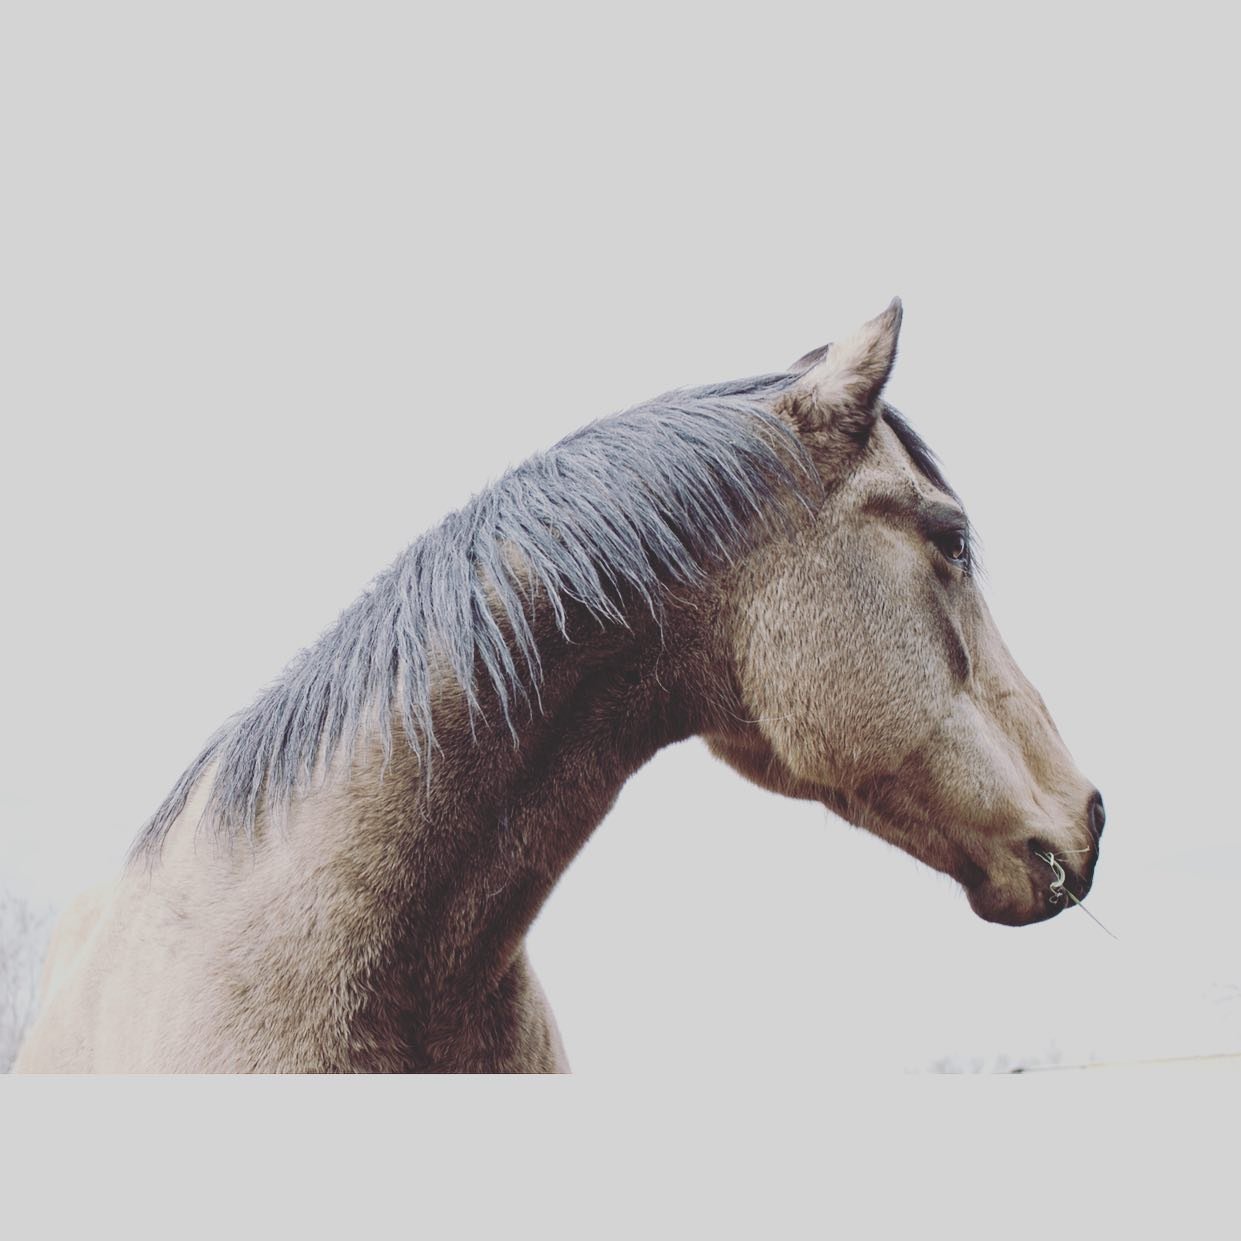 Isn&rsquo;t she cool?!?!
she is, ultimately, the biggest pain in the butt horse I&rsquo;ve ever owned, but she&rsquo;s always just been so dang pretty and way cooler than we are-lol. 
hope you&rsquo;re all getting into the Christmas spirit!
#newmexic